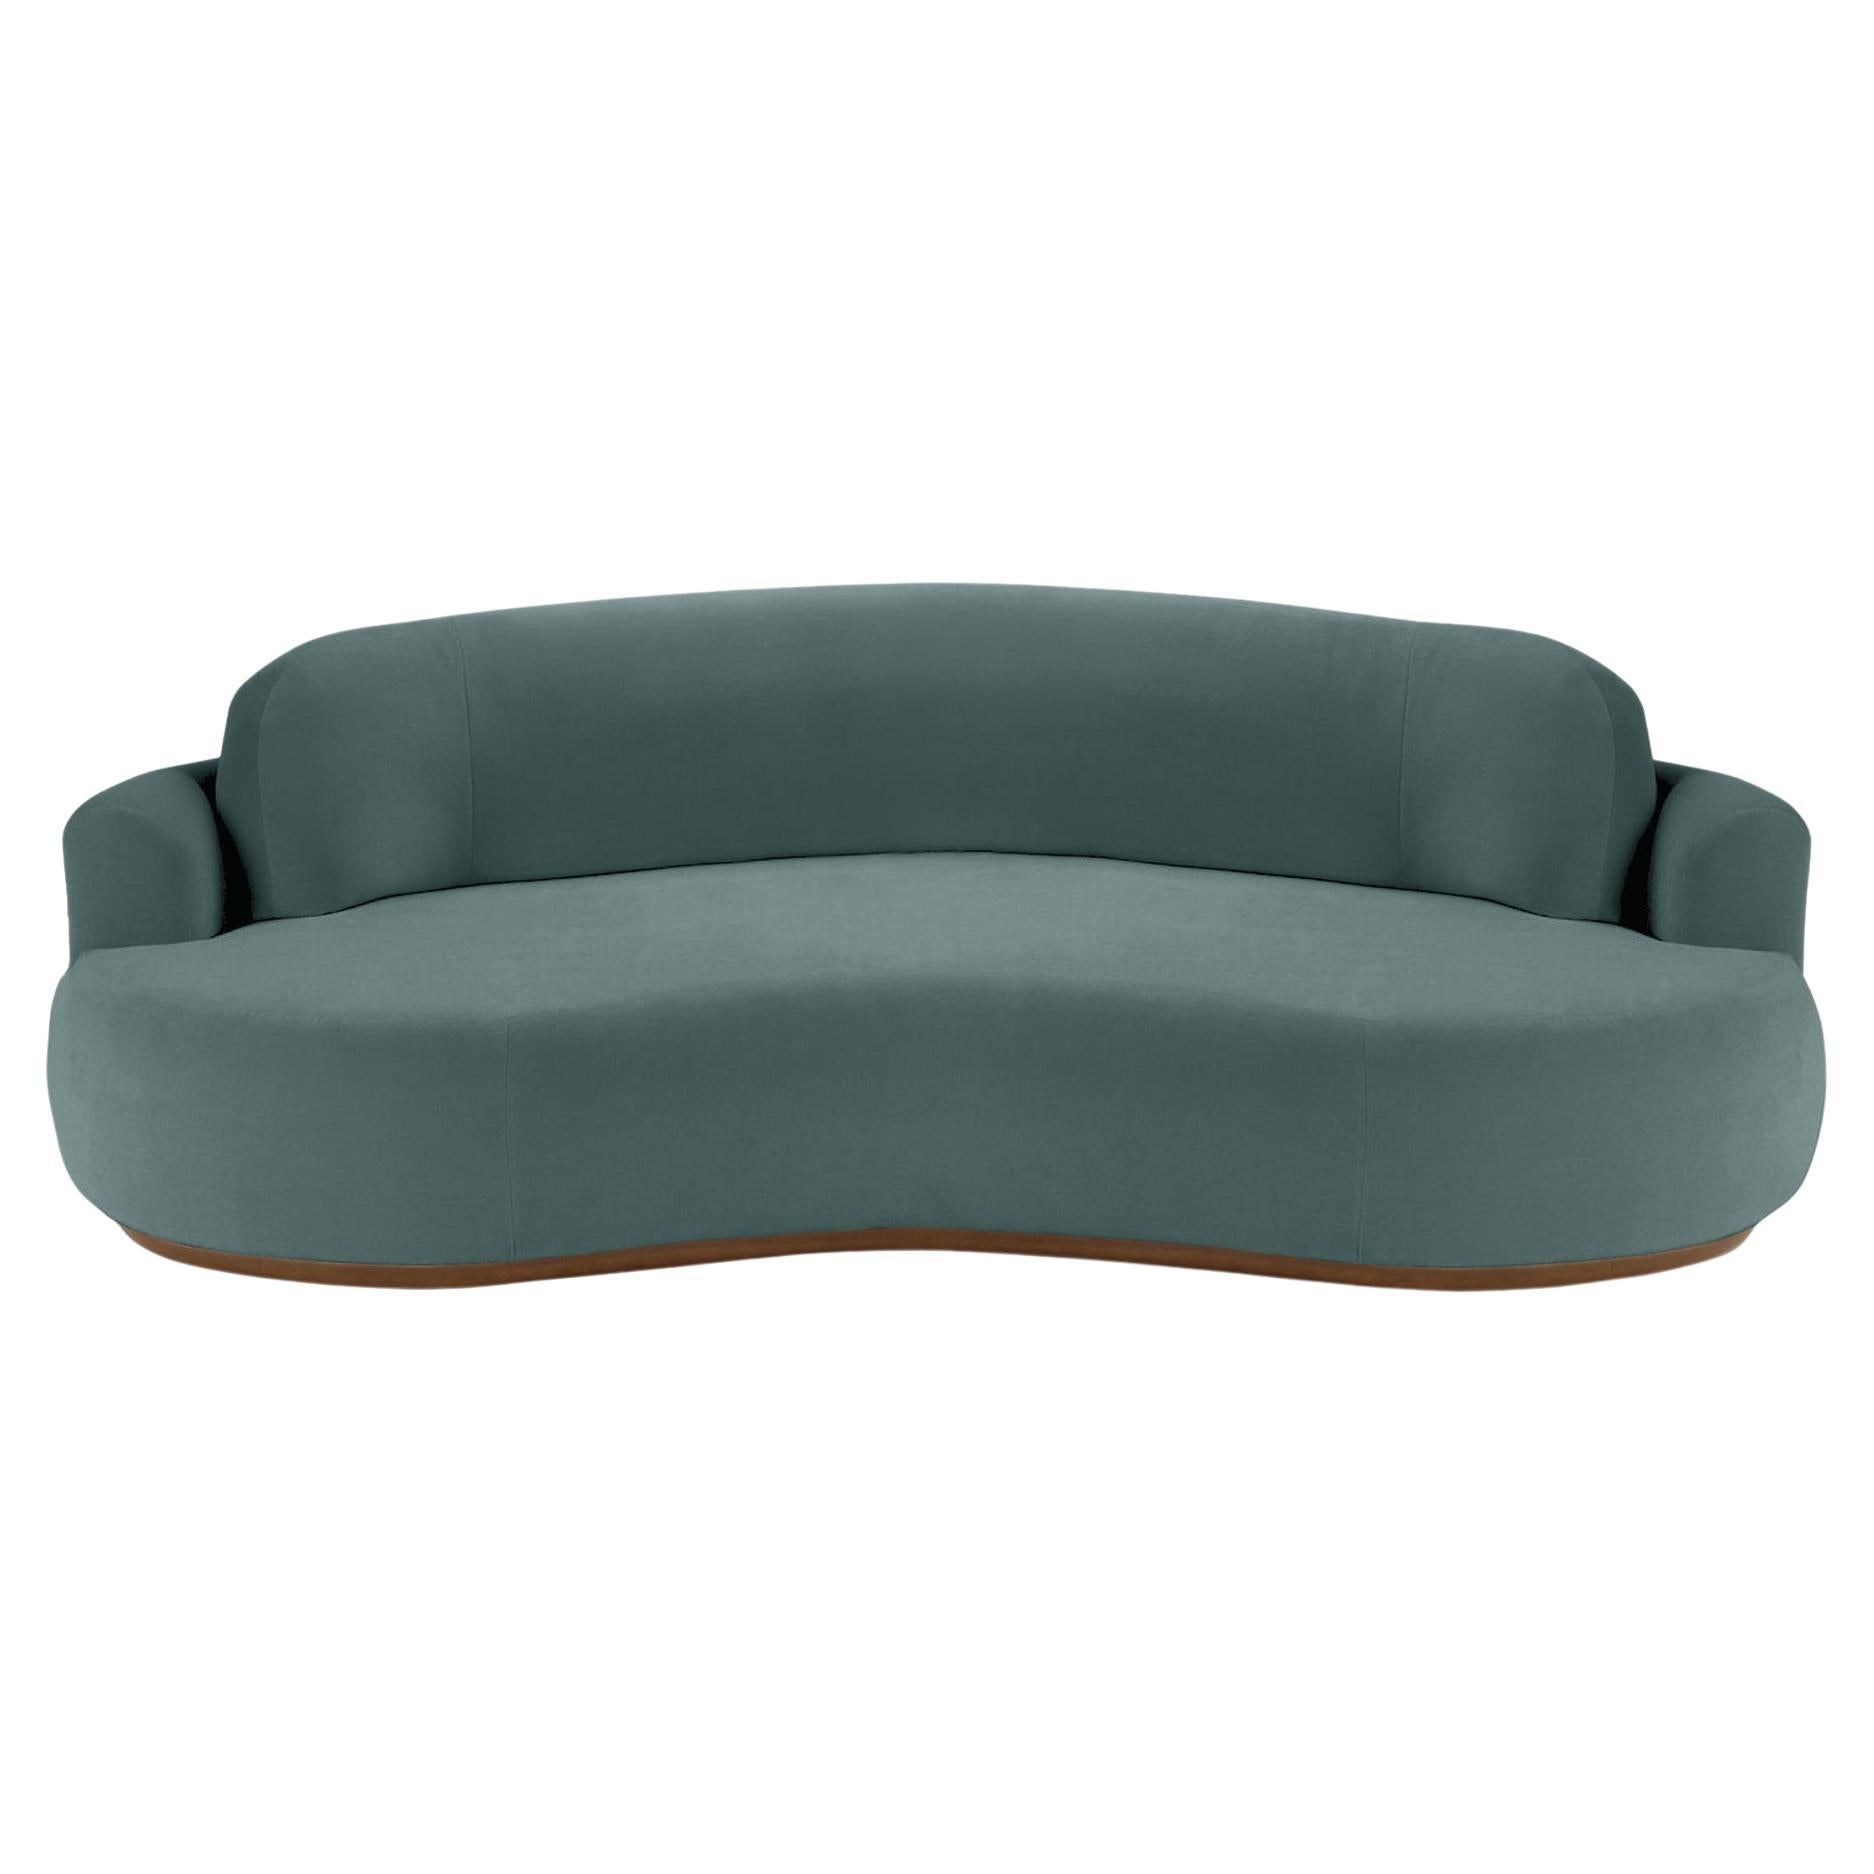 Naked Round Sofa, Medium with Beech Ash-056-1 and Teal For Sale